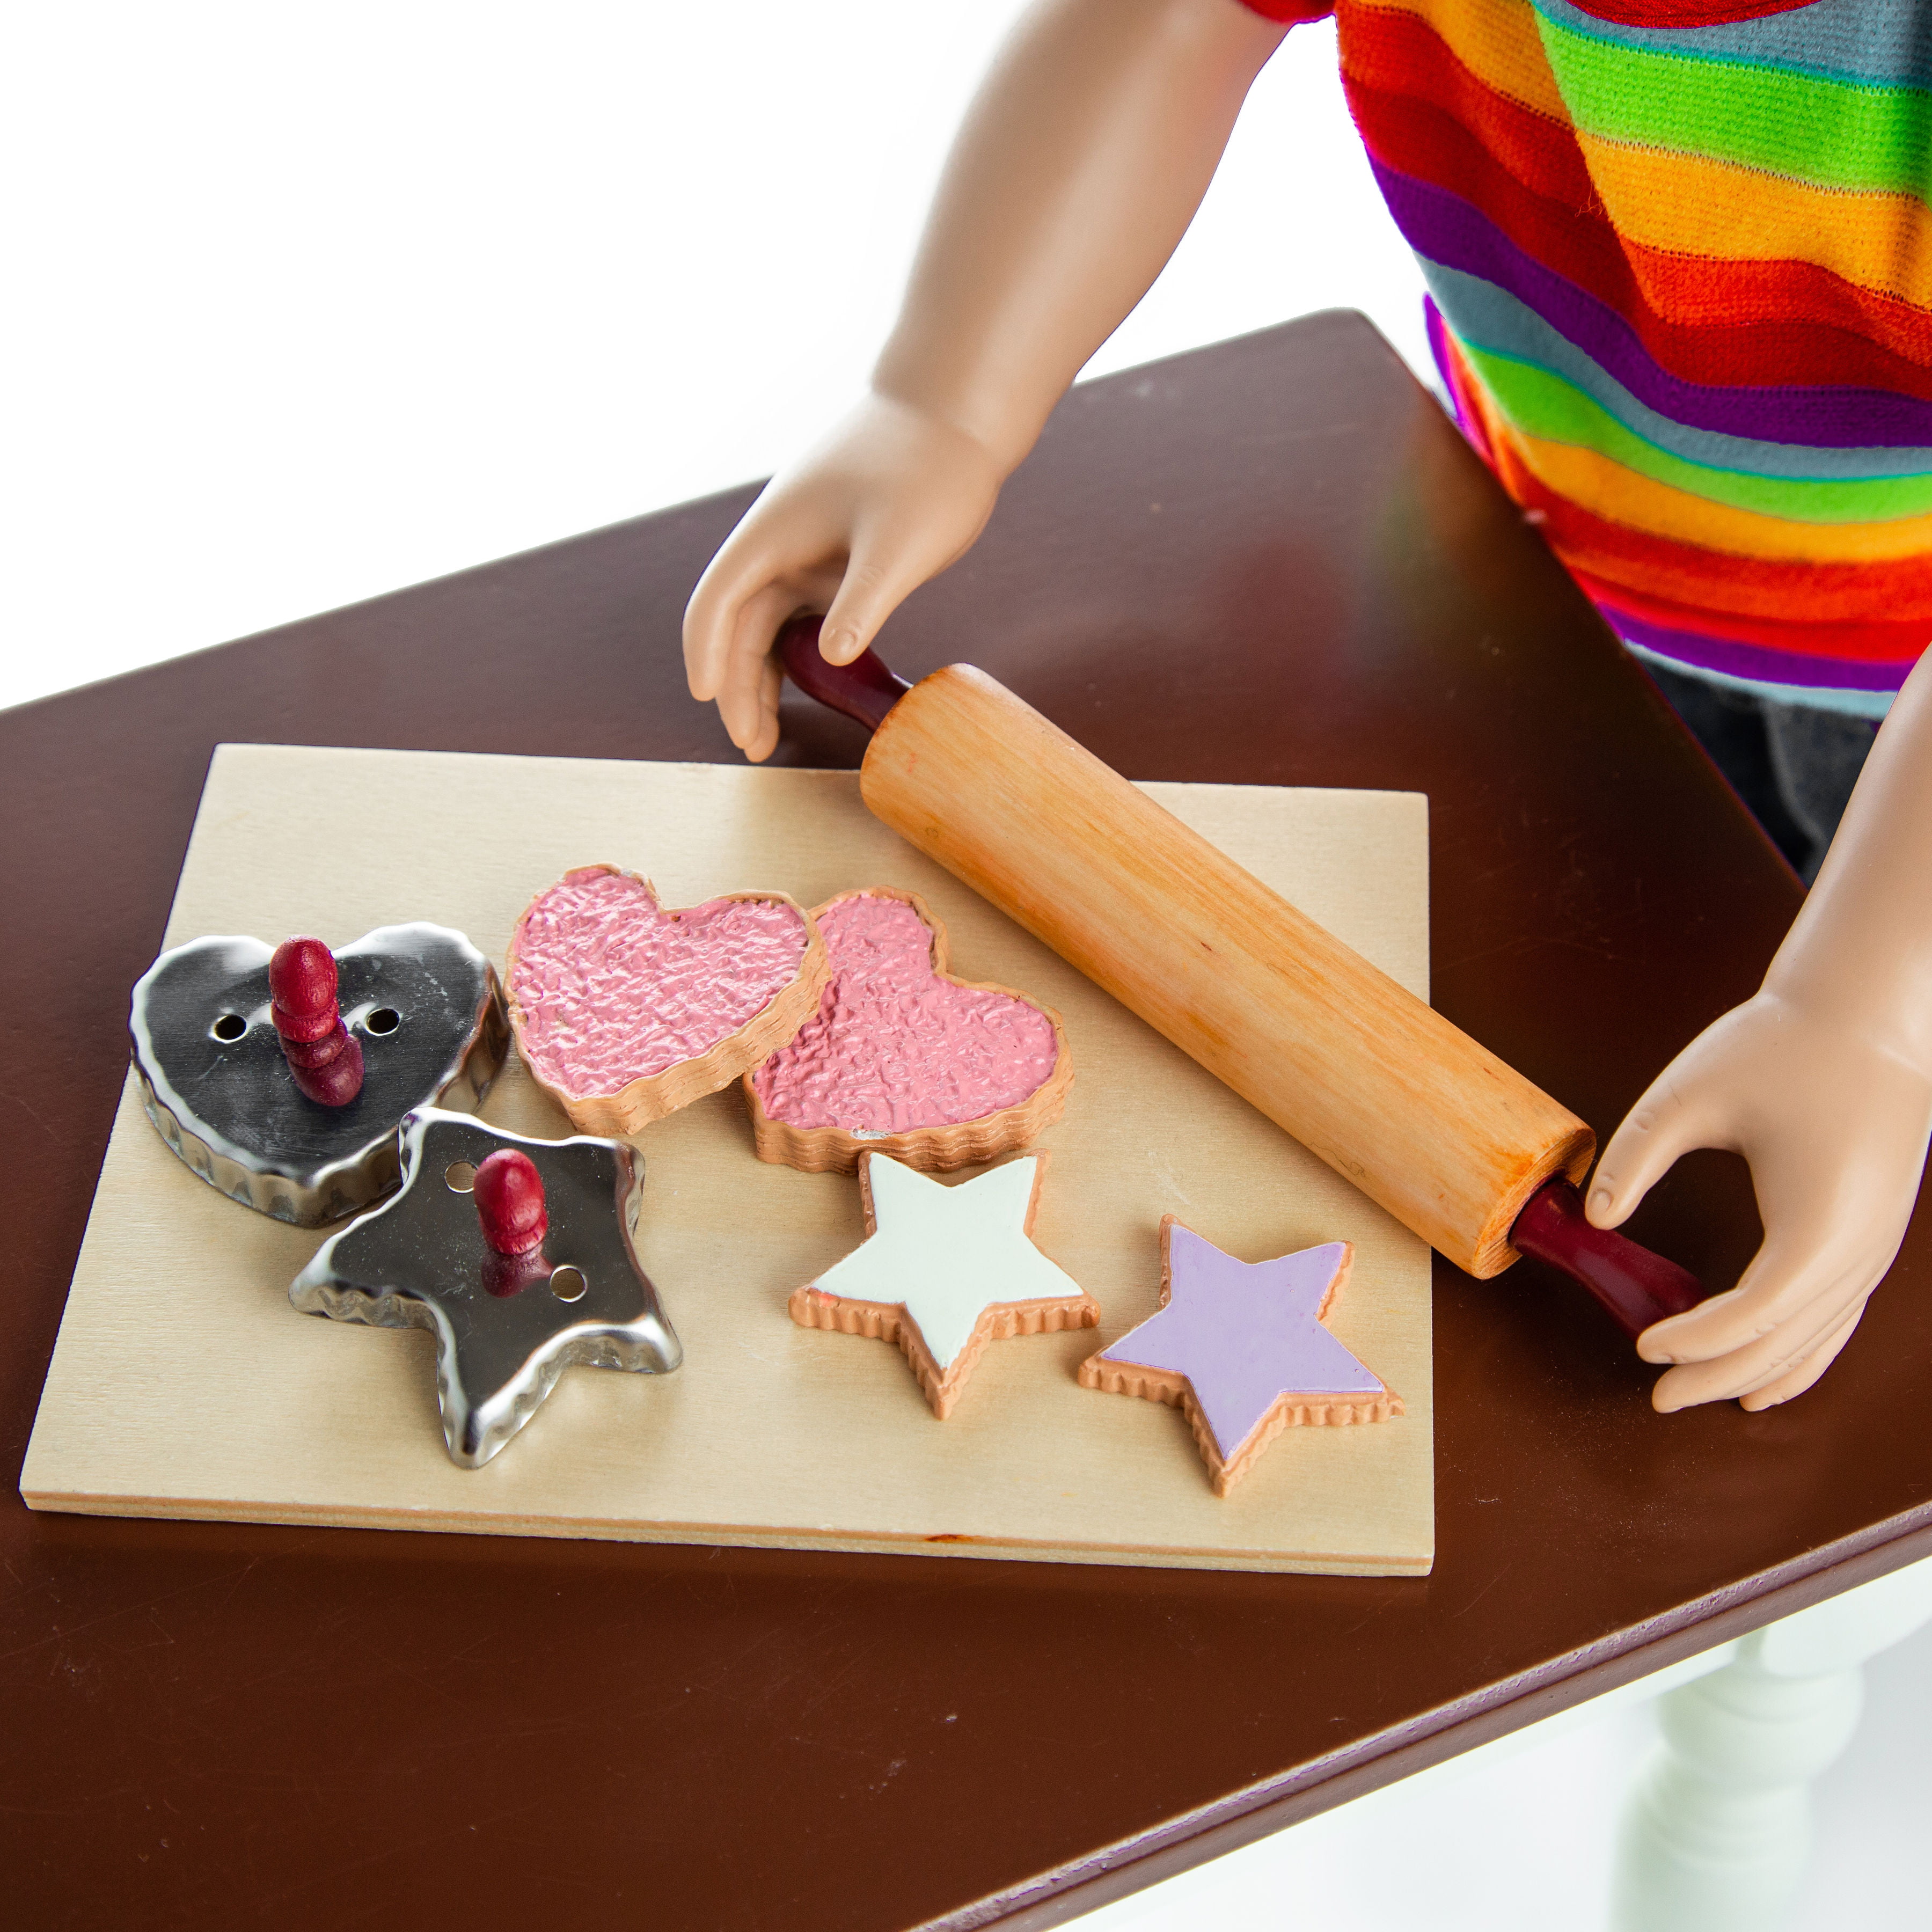 8-Piece Cookie Baking Gift Sets with Tools-18-Inch Dolls